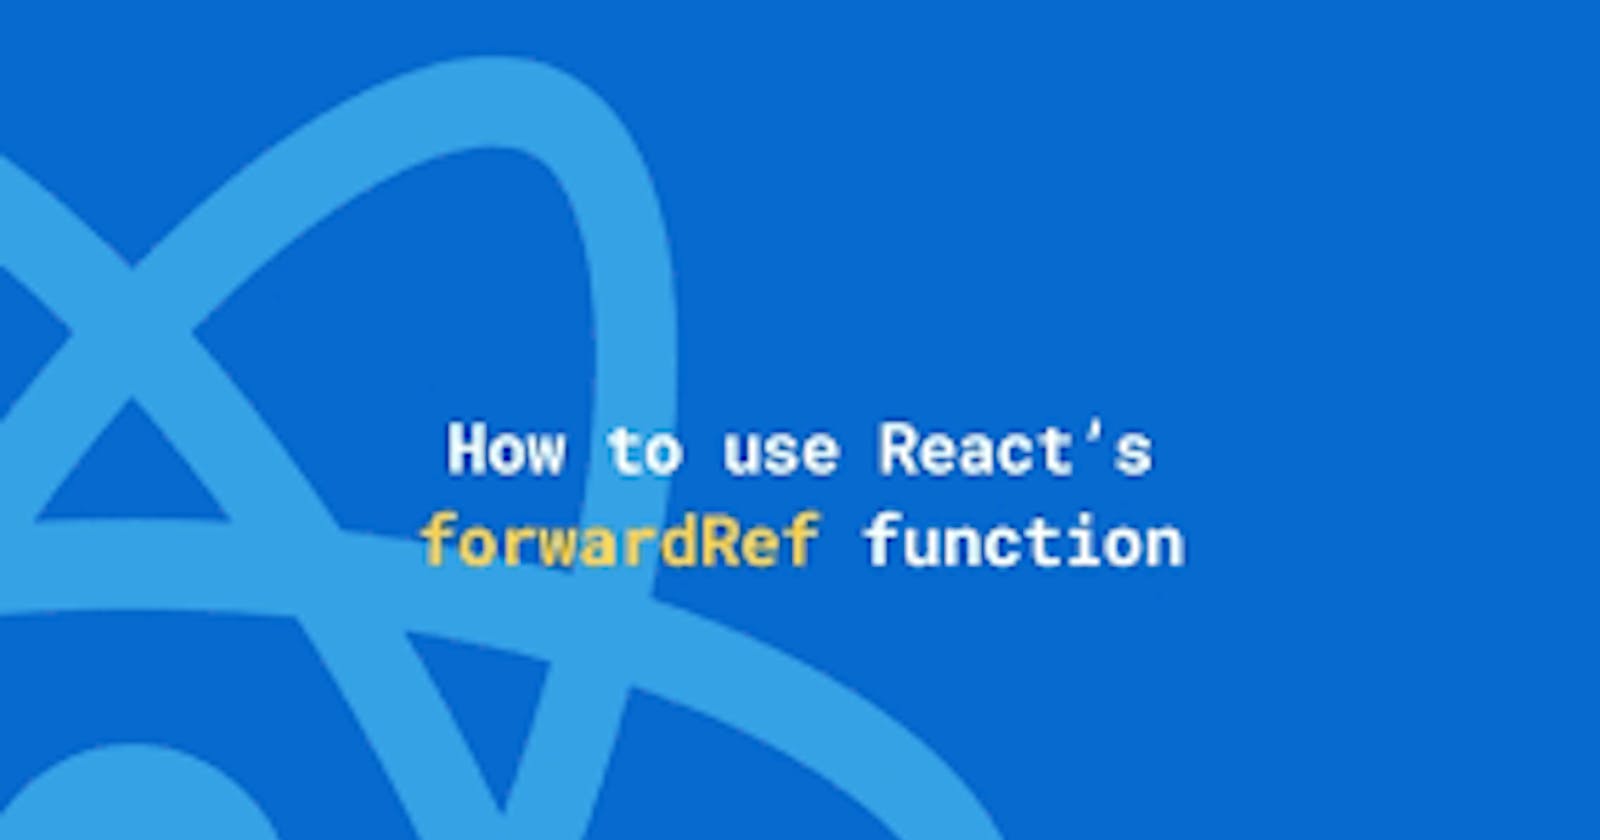 How to use React's forwardRef function